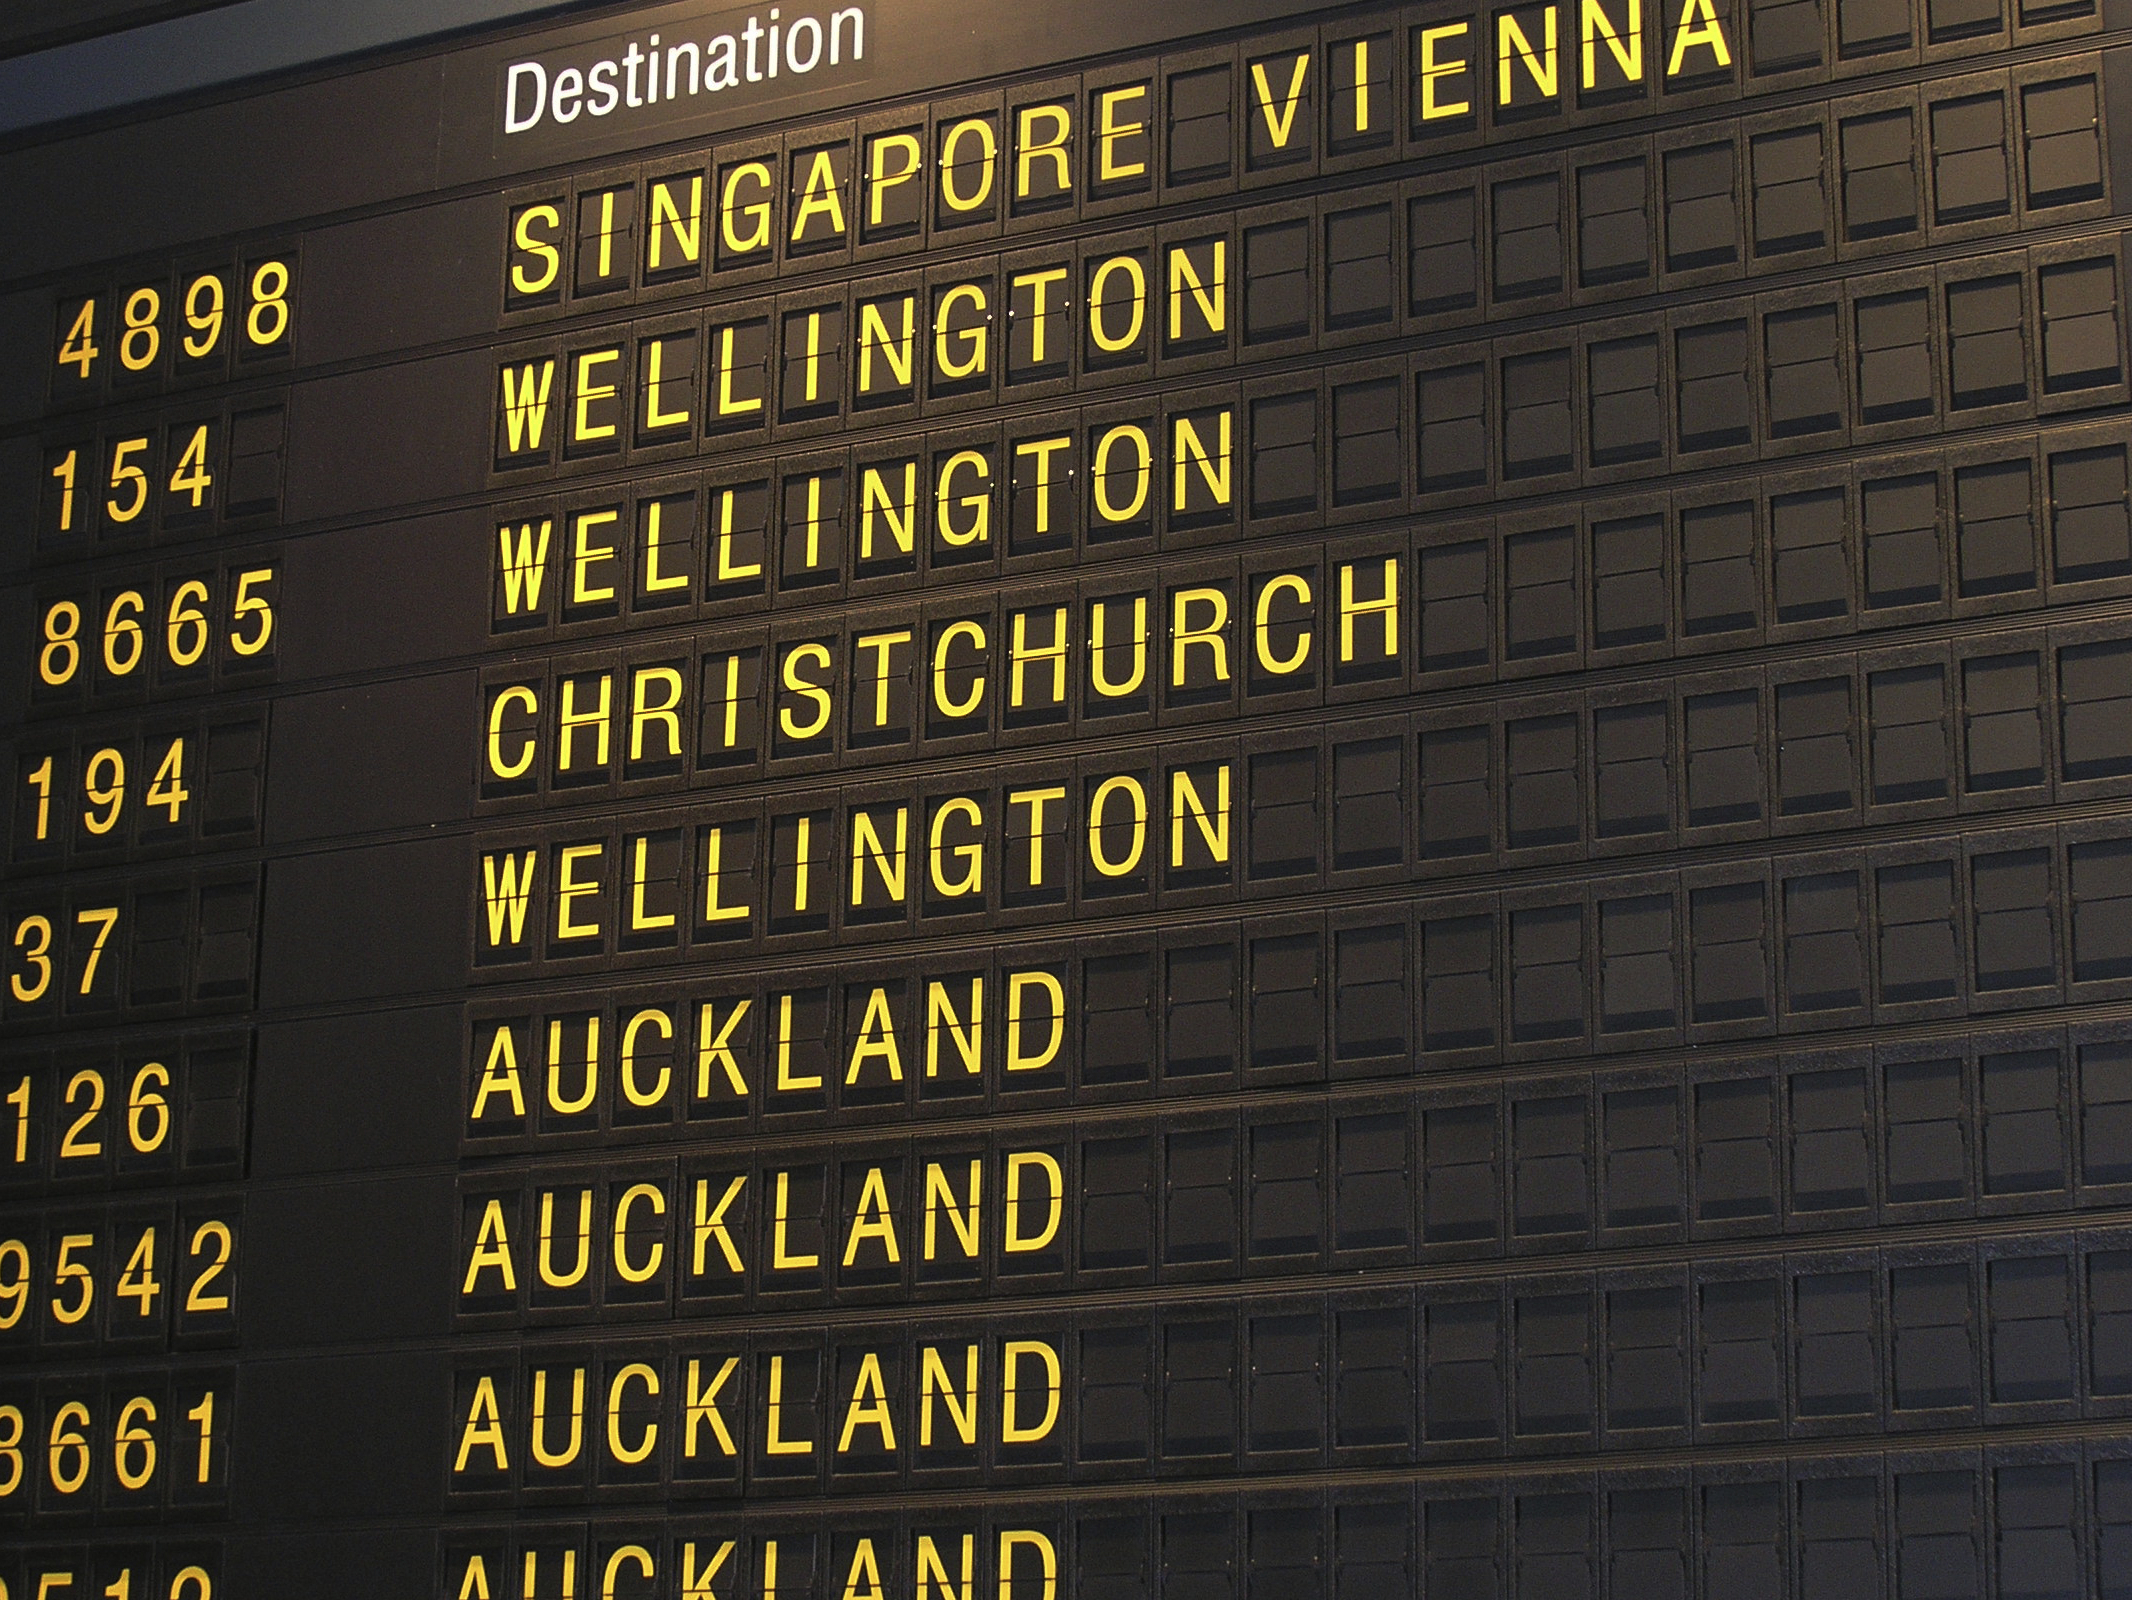 New Zealand’s Auckland Airport